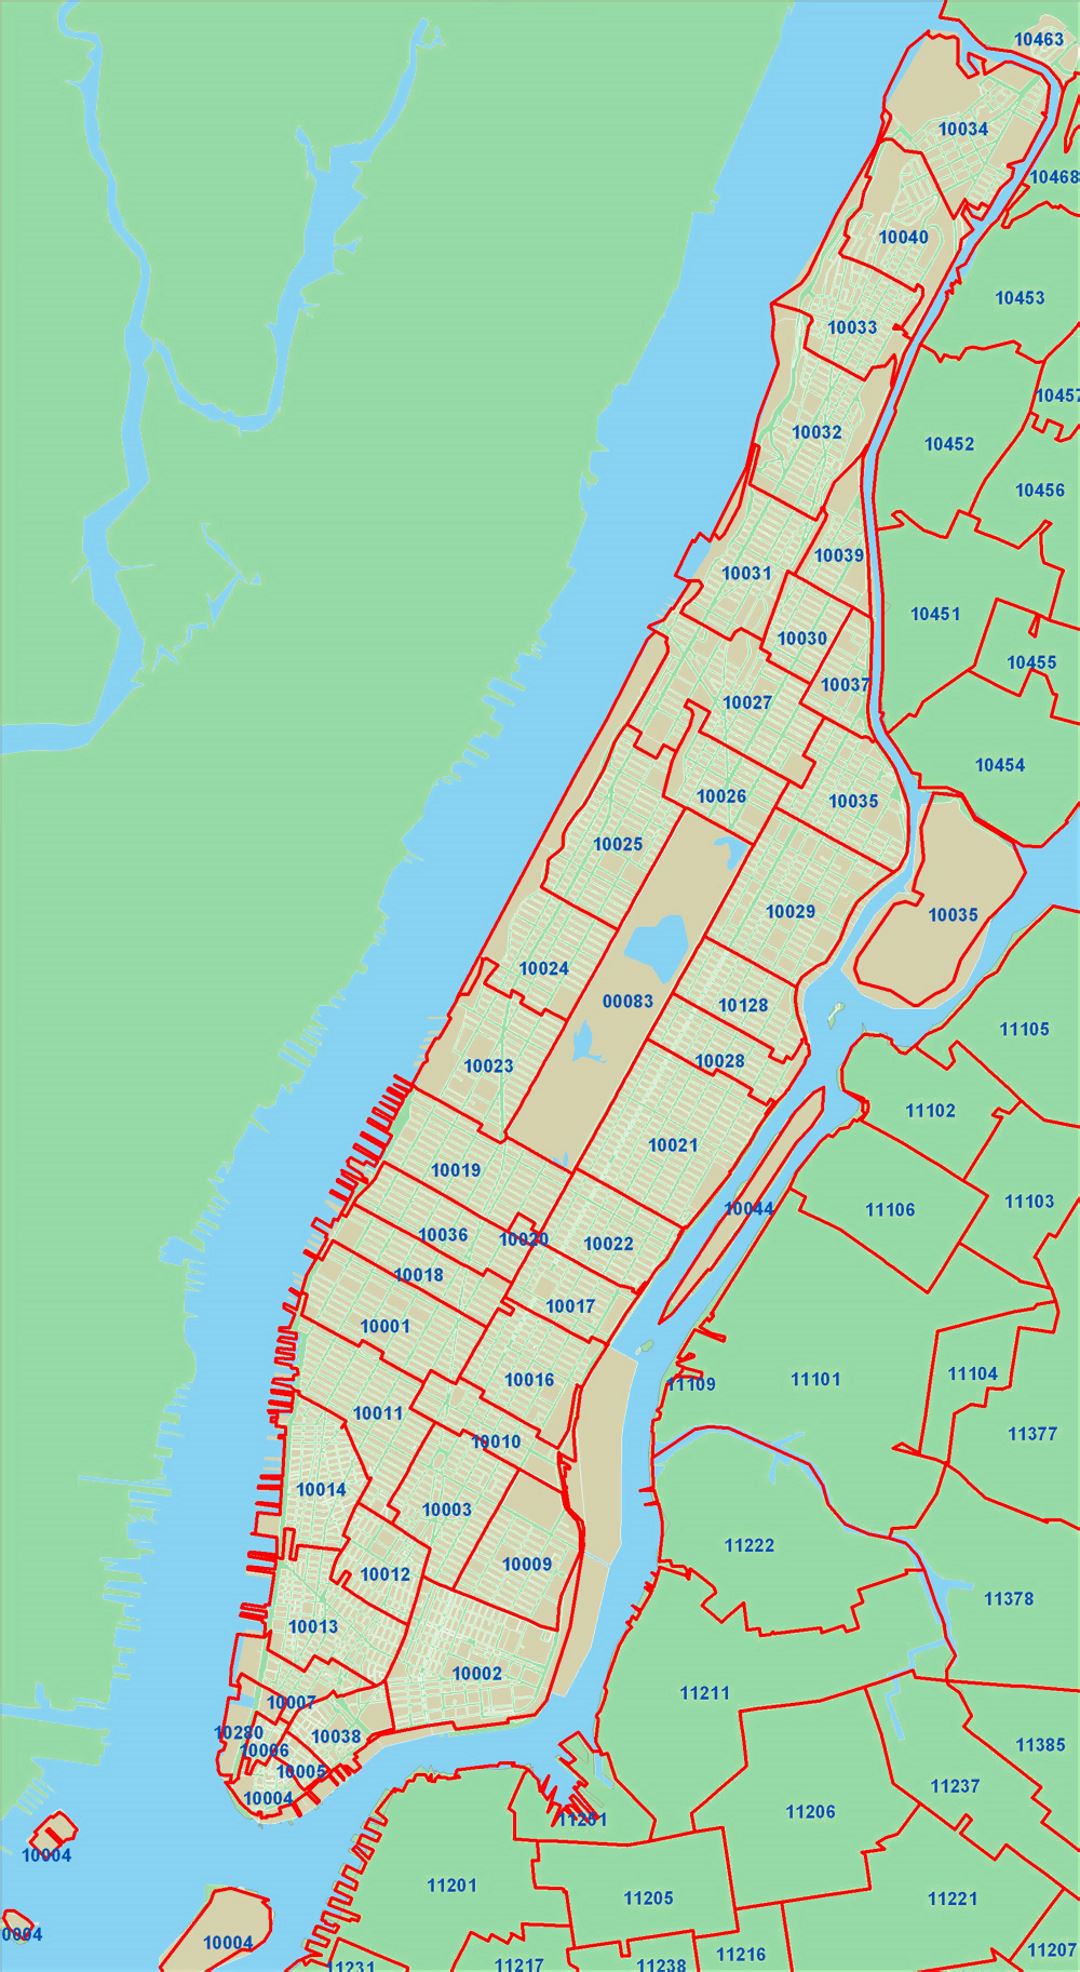 Detailed zip codes map of New York city